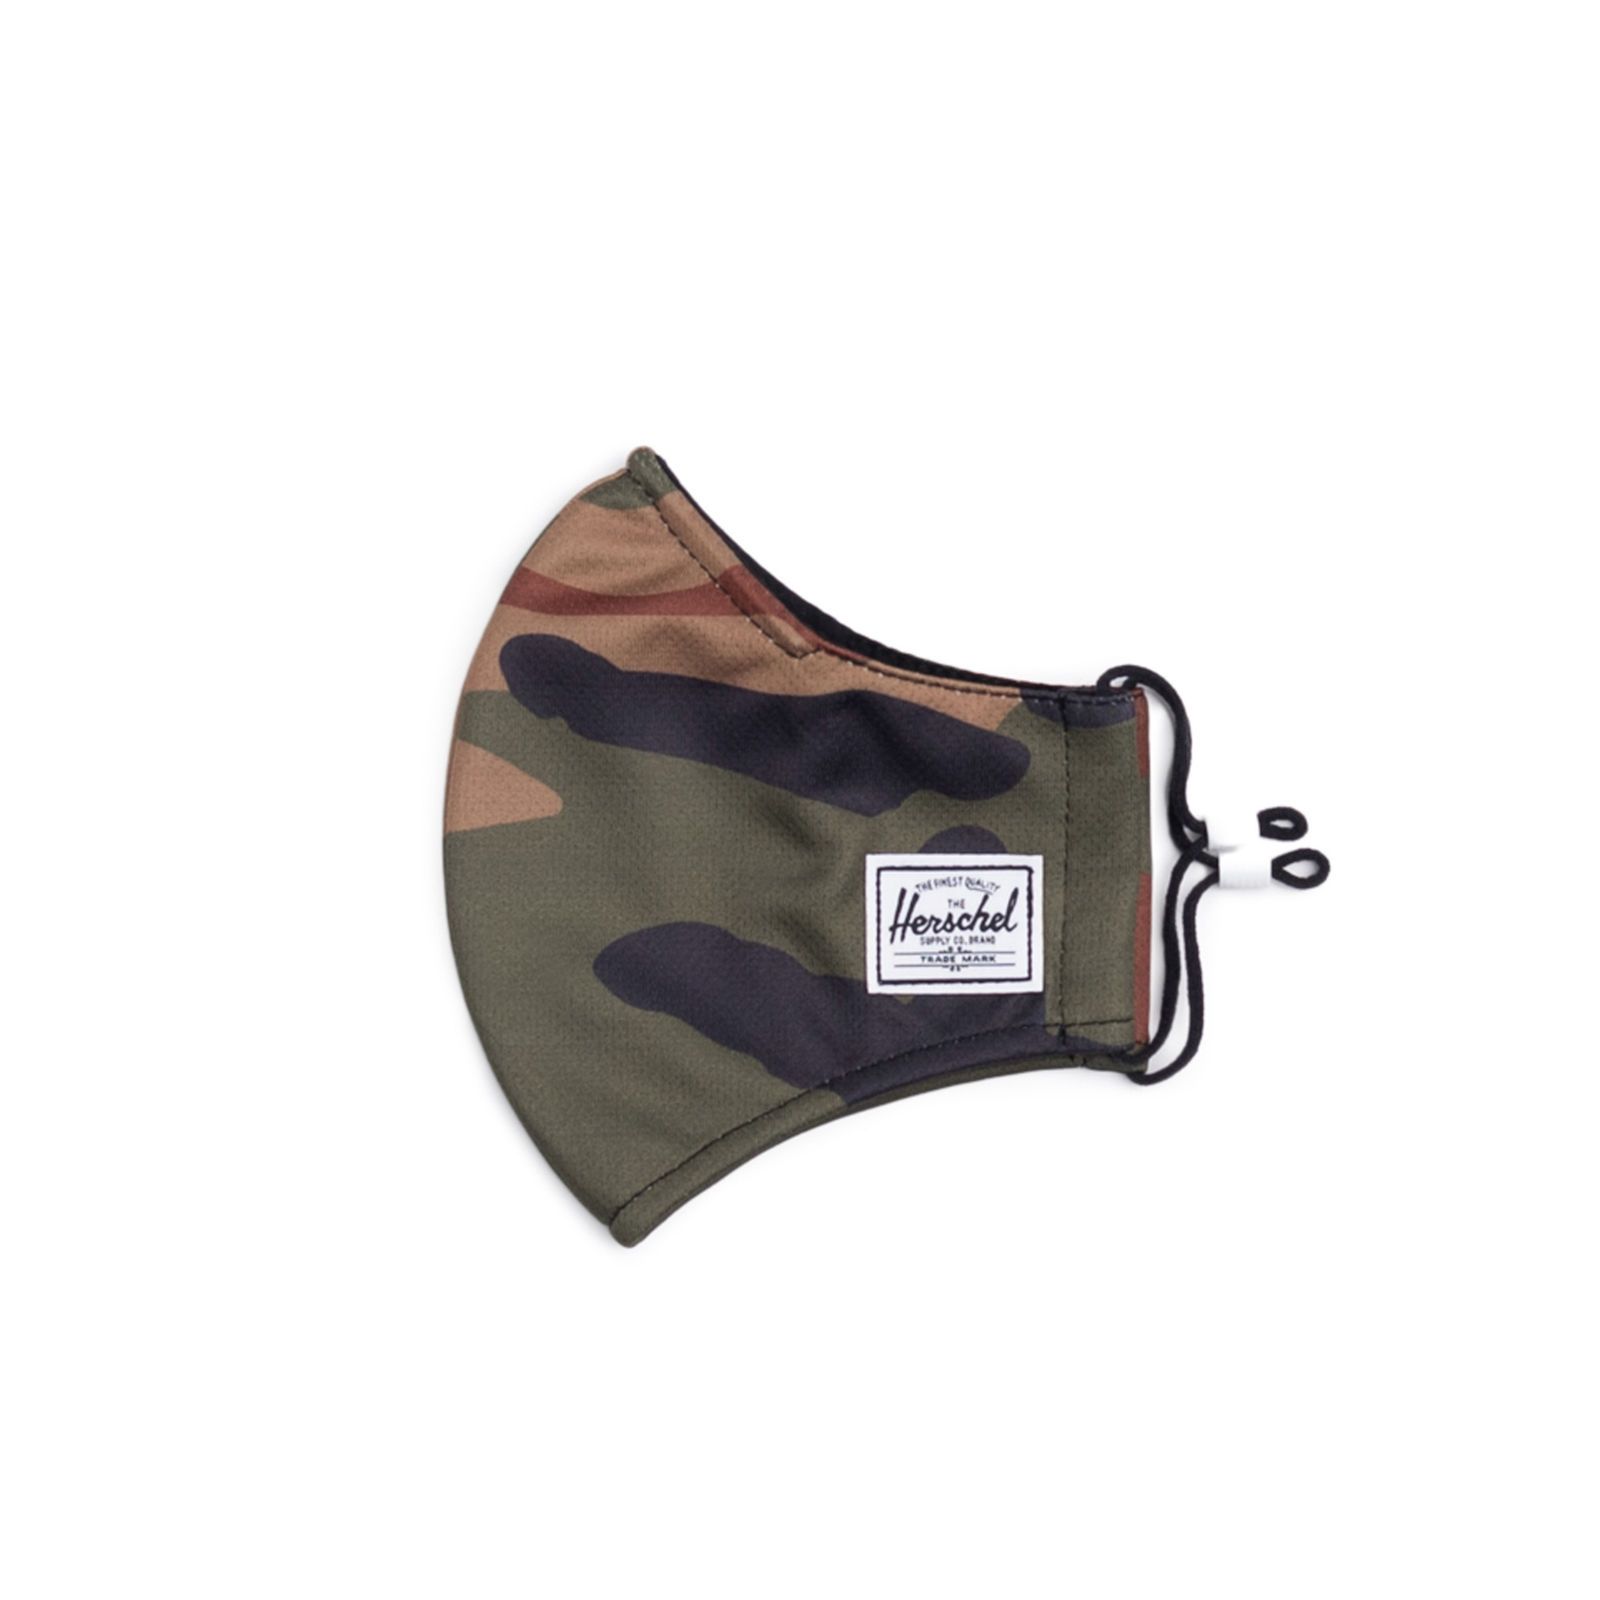 ACCESSORIES - Herschel Supply Co Classic Face Fitted Face Mask Woodland Camo 10974-04797